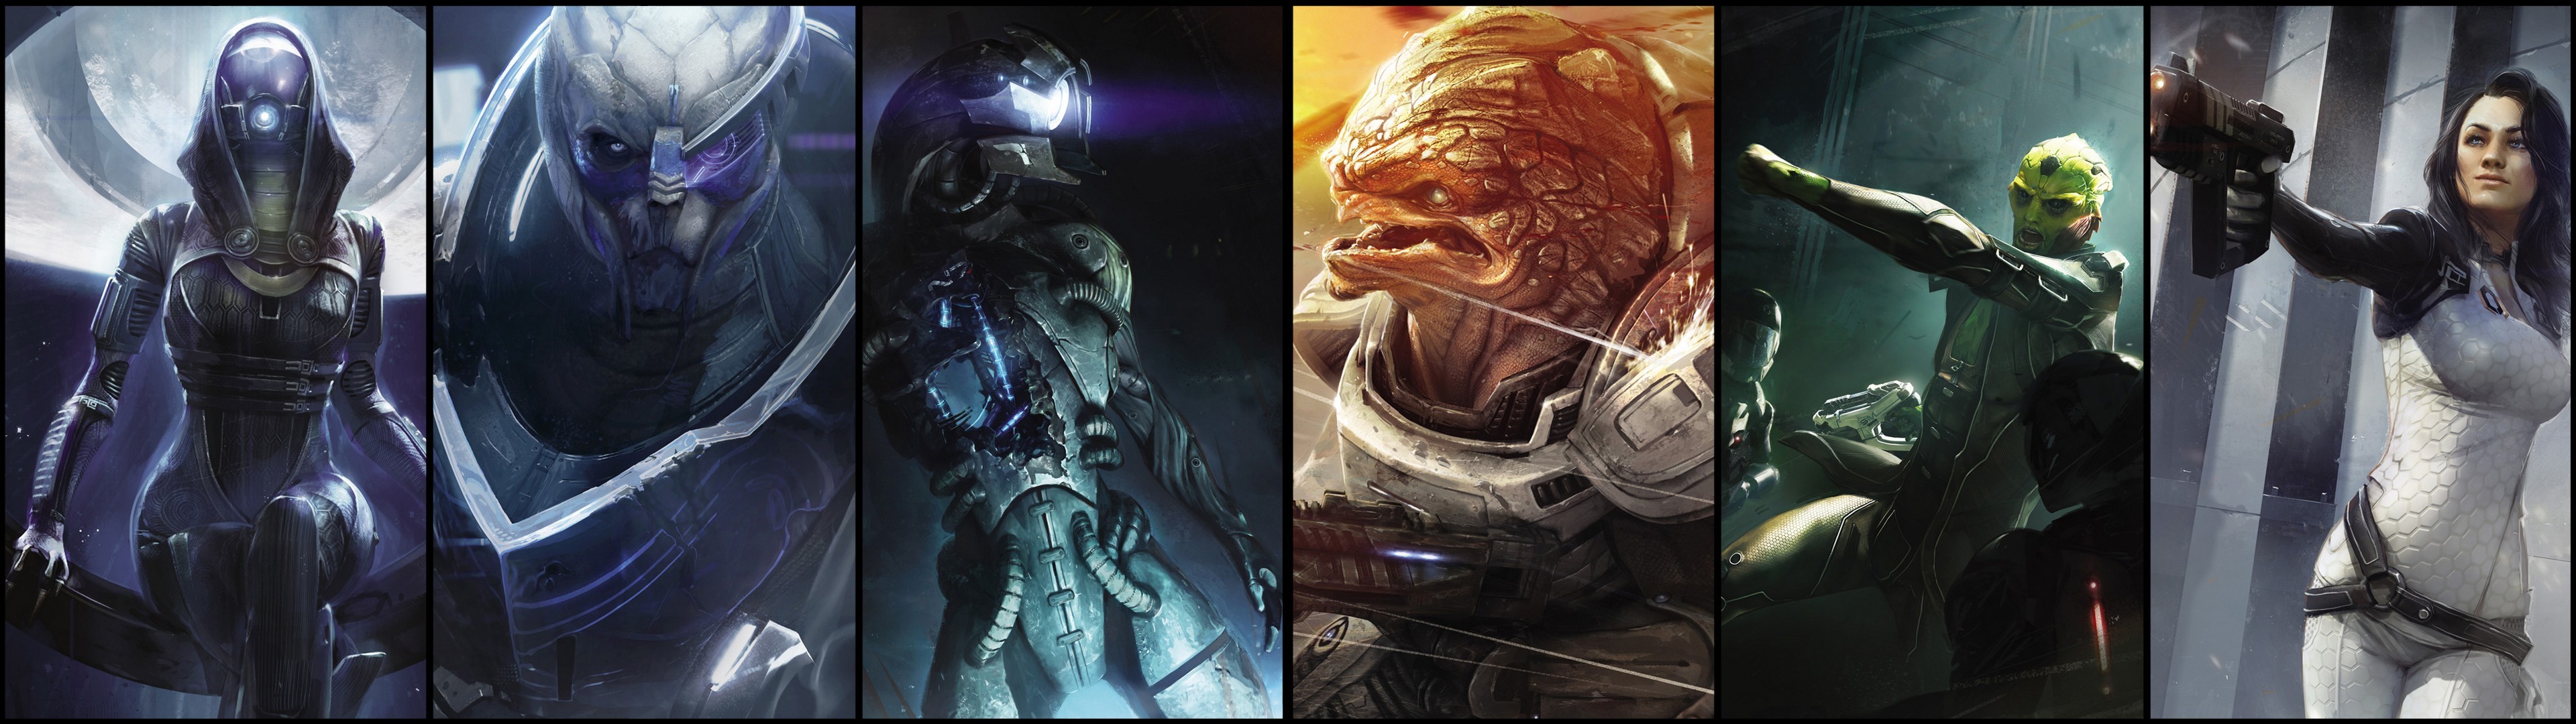 General 3840x1080 Mass Effect 3 collage video games Mass Effect 2 video game art PC gaming science fiction science fiction women video game girls Bioware EA Games